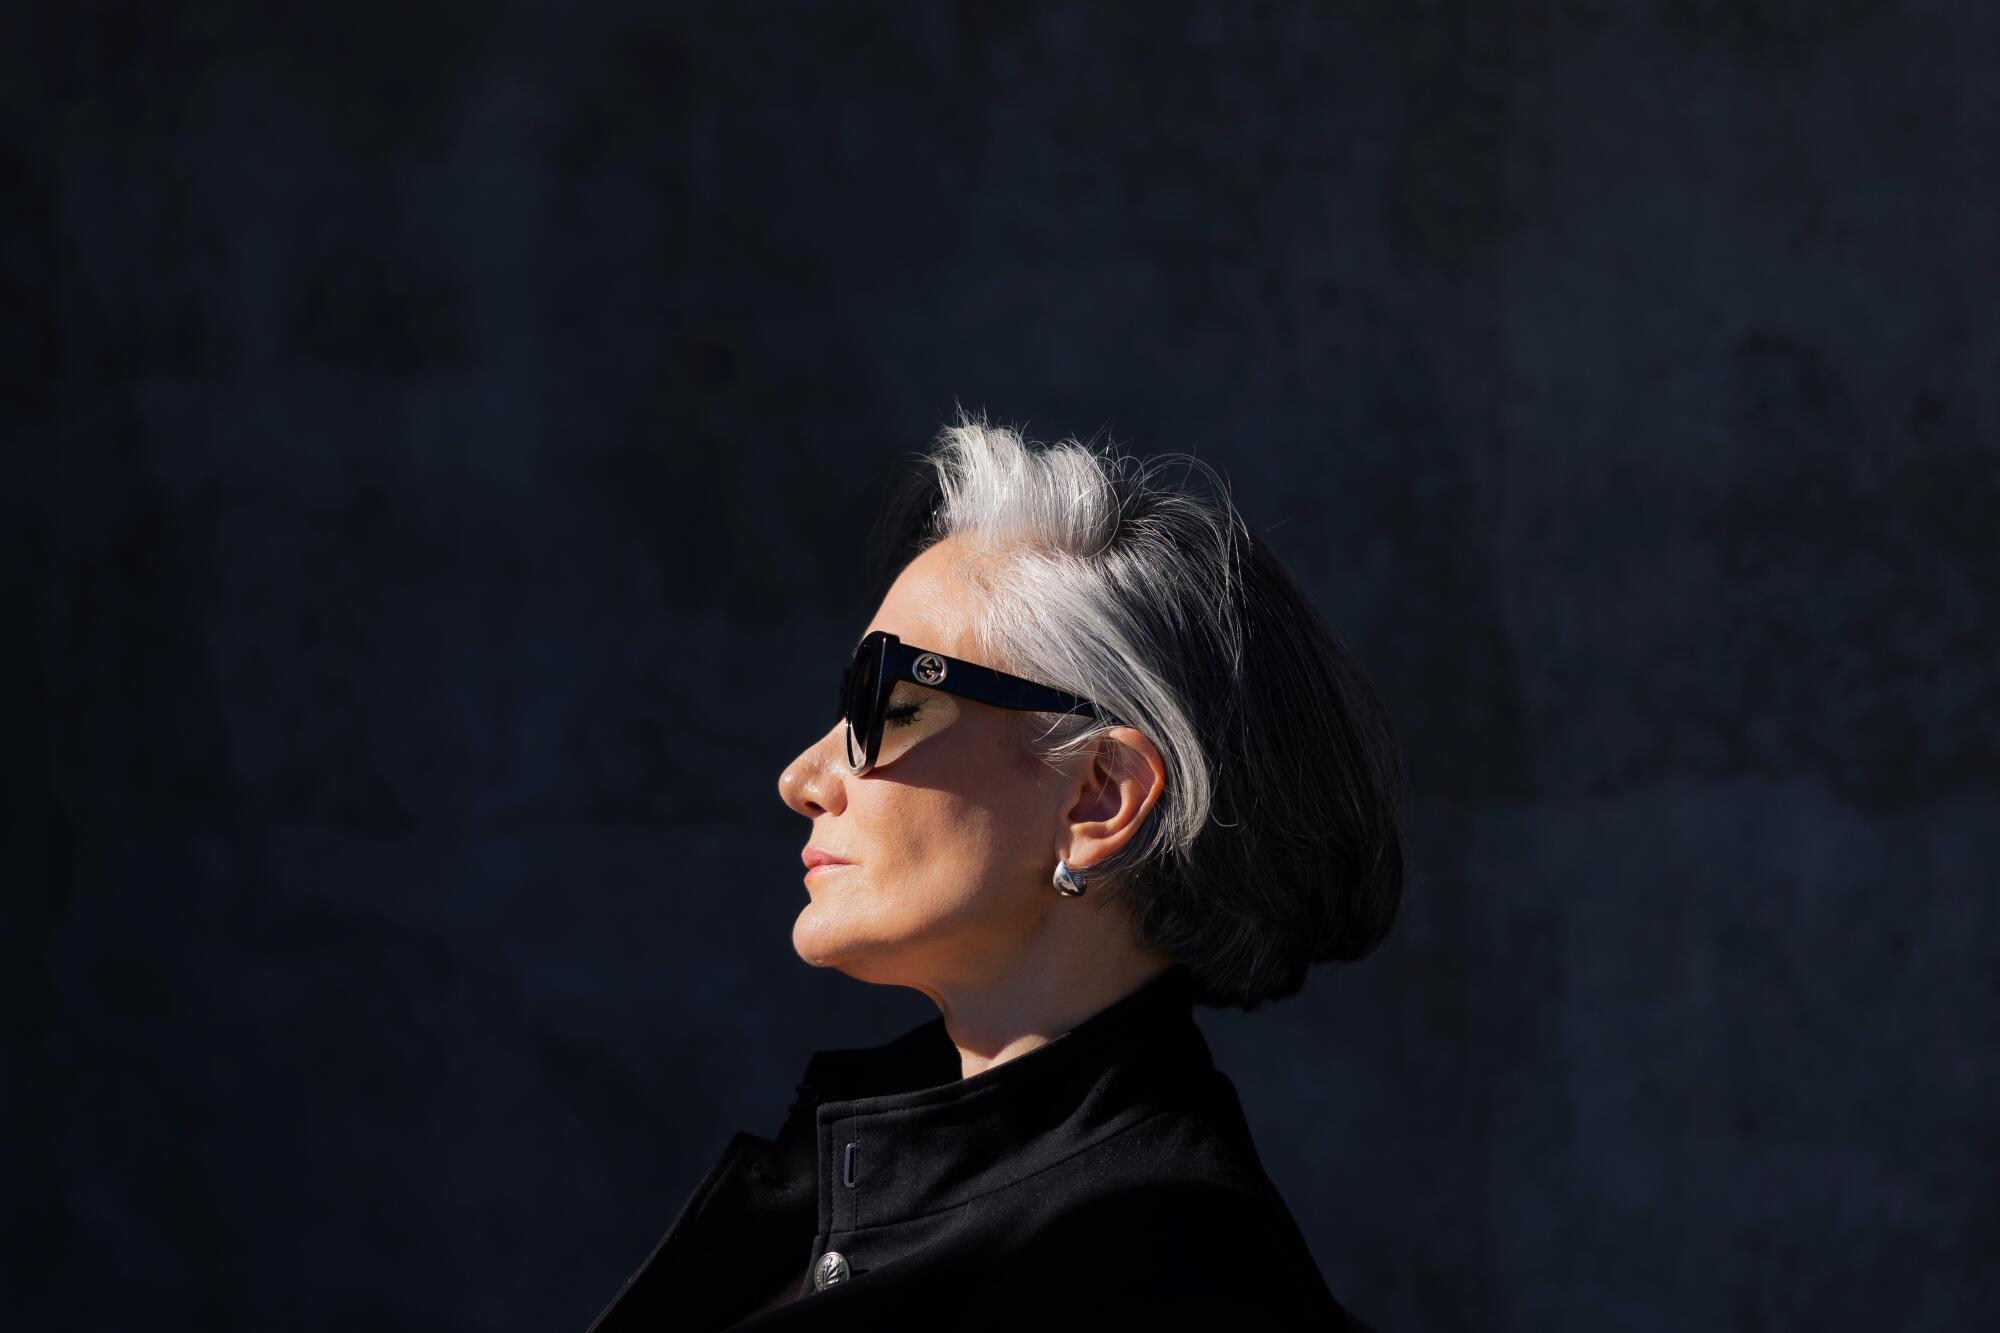 A profile of a woman with her eyes closed and face toward the sun with sunglasses on.